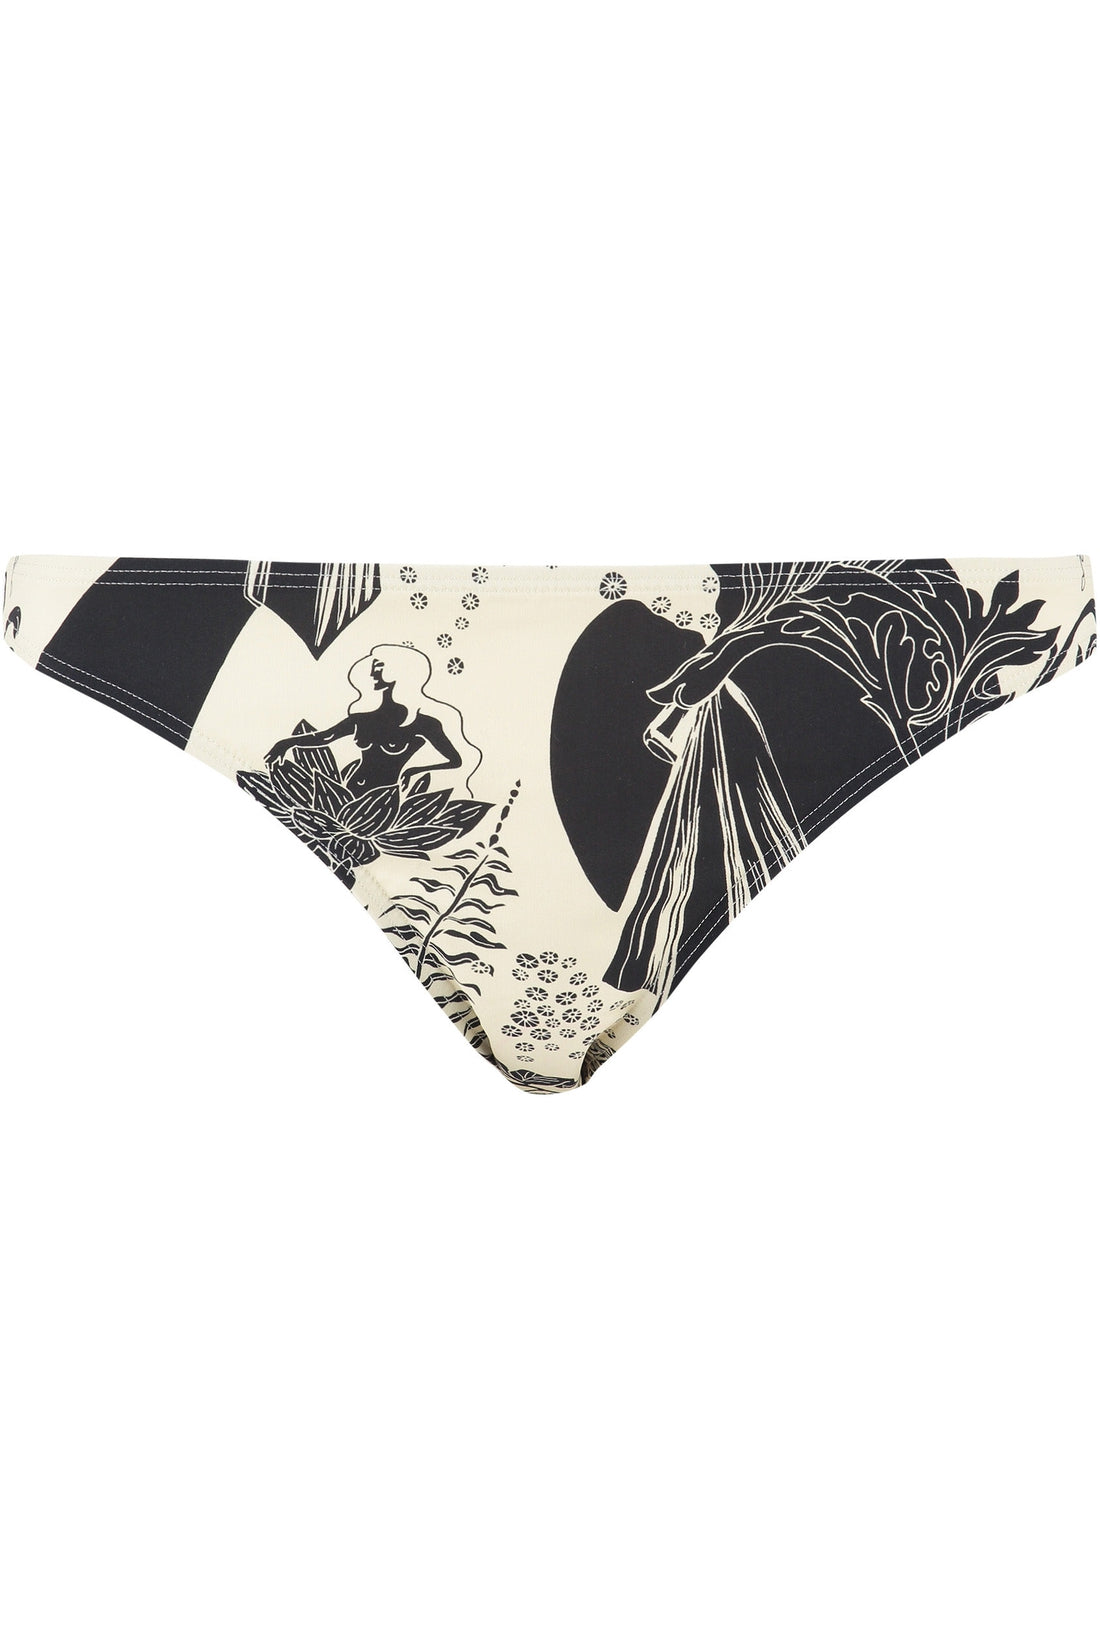 Tory Burch-OUTLET-SALE-Printed bikini hipster-ARCHIVIST